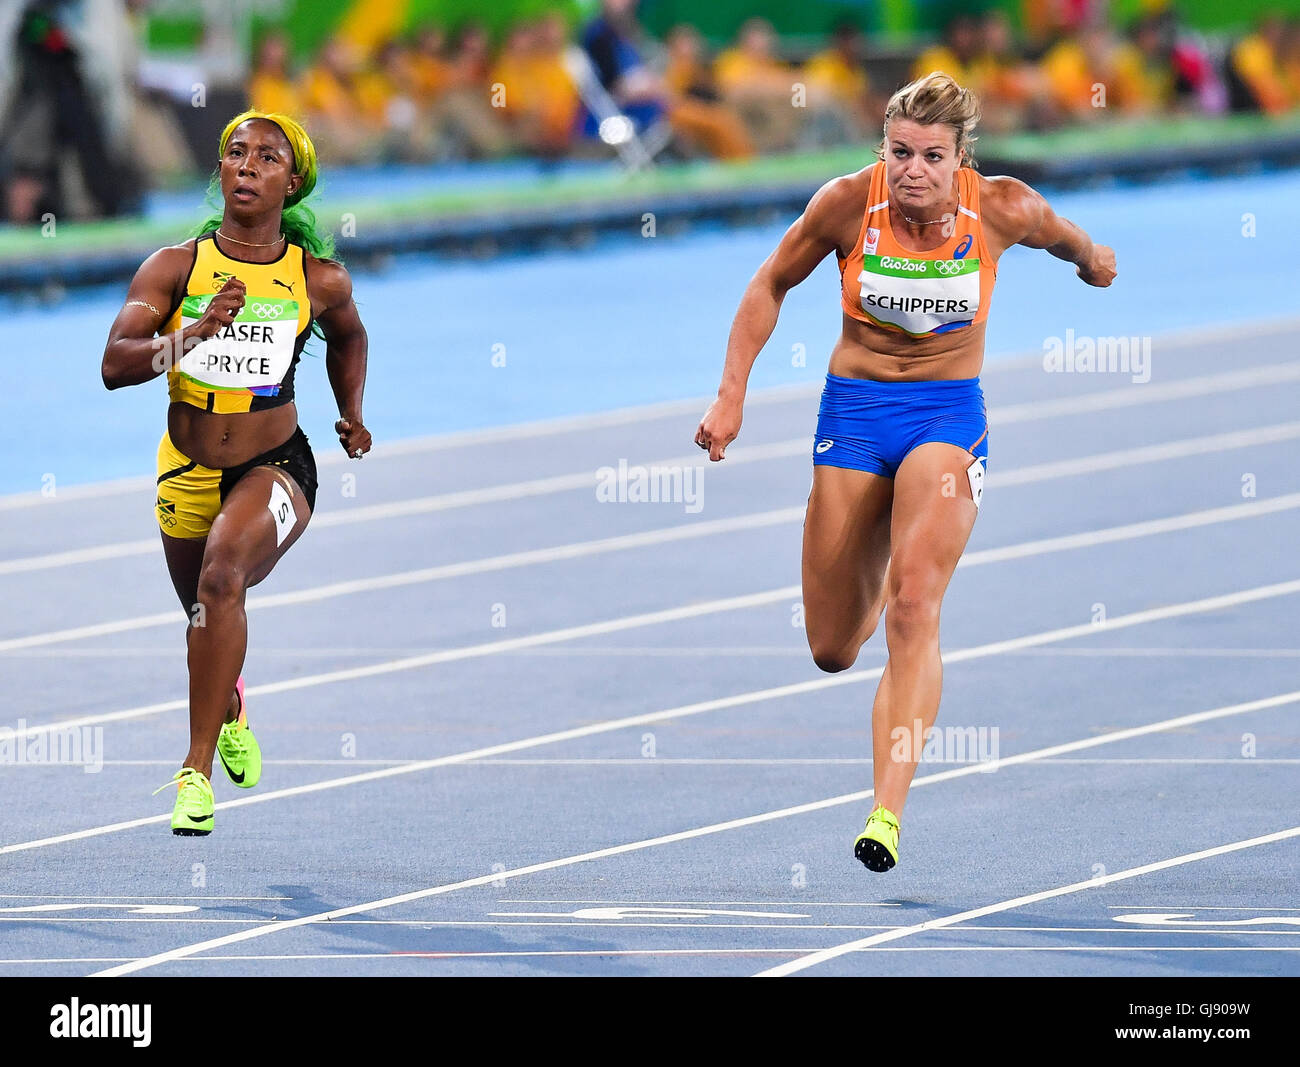 RIO DE JANEIRO, BRAZIL - AUGUST 13: Shelley-Ann Fraser-Pryce of Jamaica and Dafne  Schippers of The Netherlands in the semi final of the women's 100m during  the evening session on Day 8